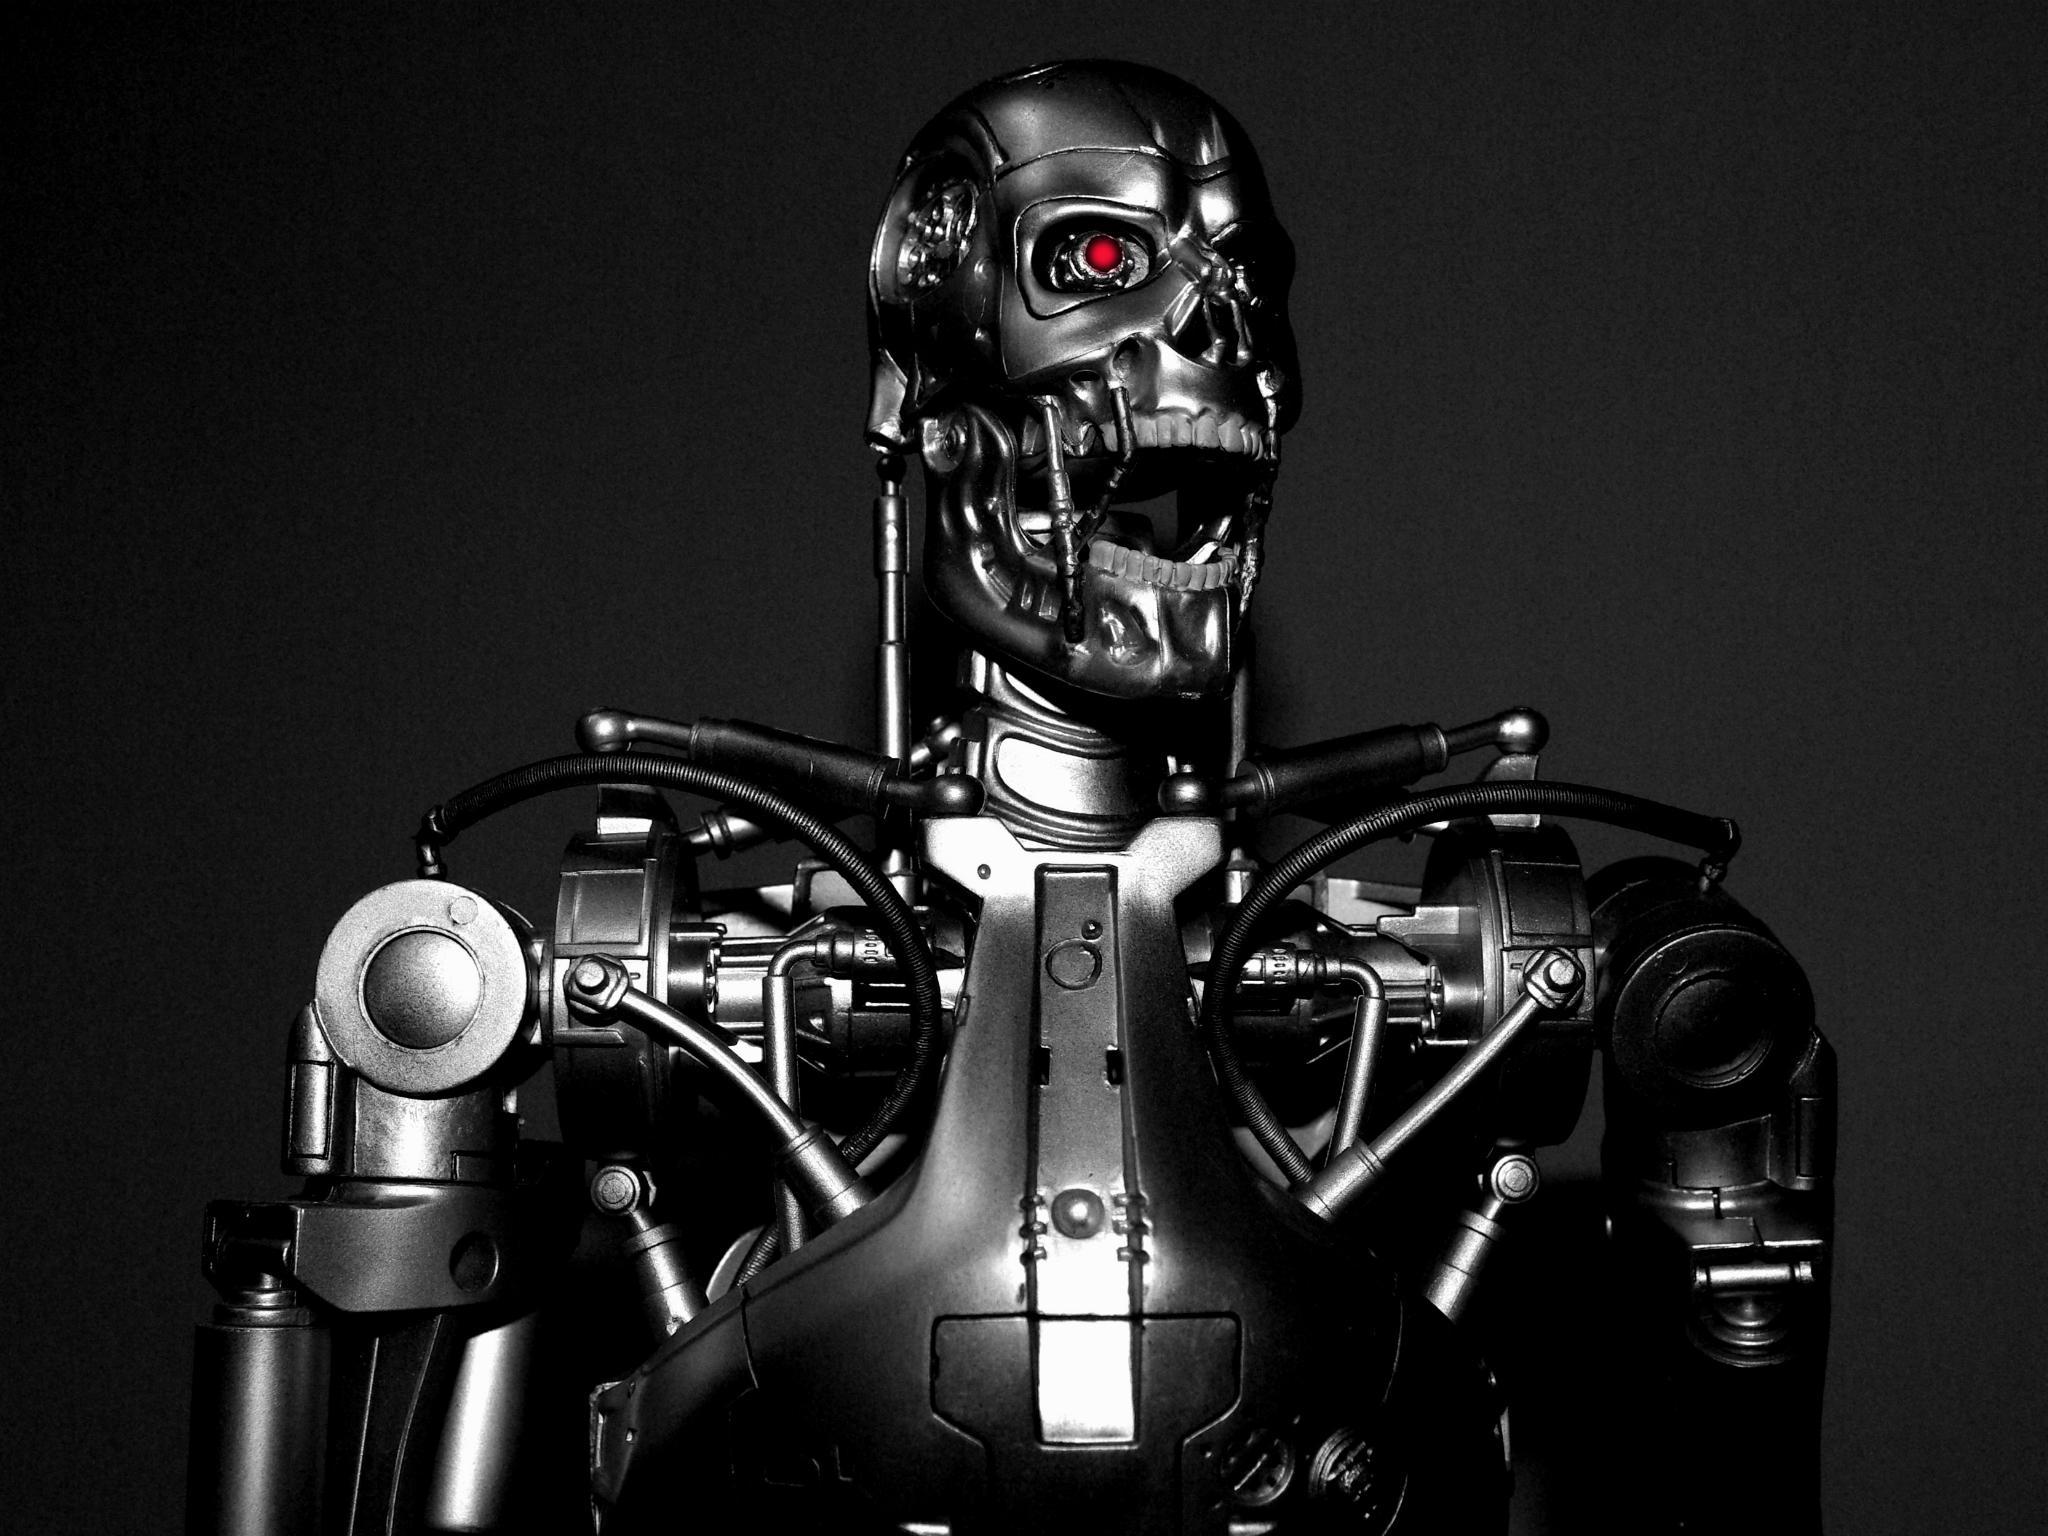 Should we fear the rise of the robots?